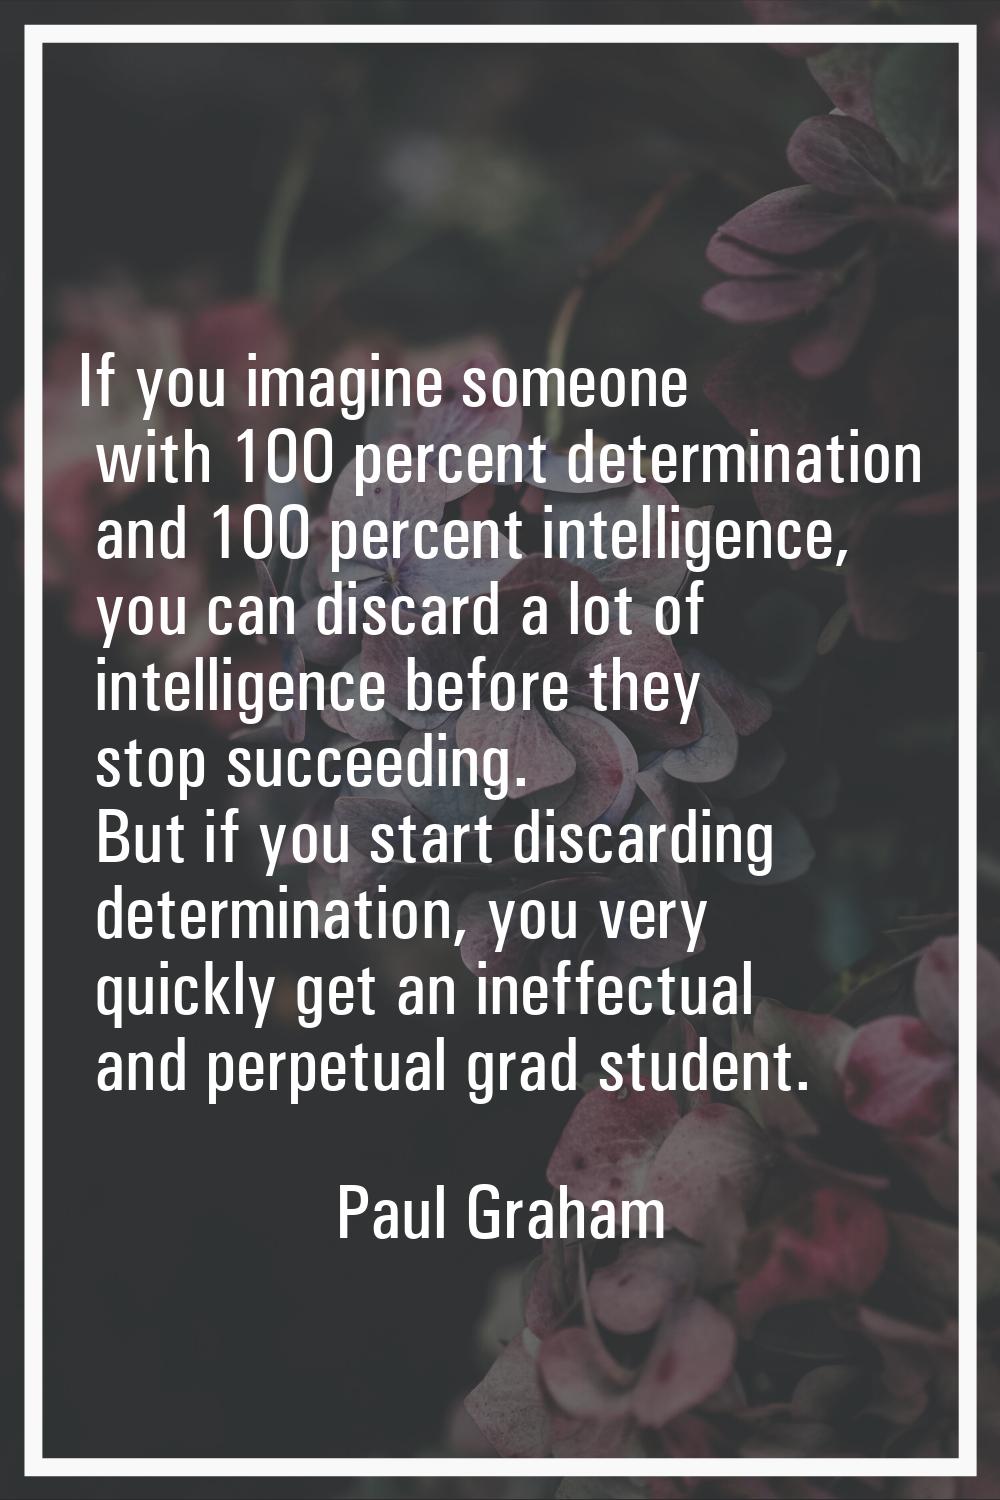 If you imagine someone with 100 percent determination and 100 percent intelligence, you can discard